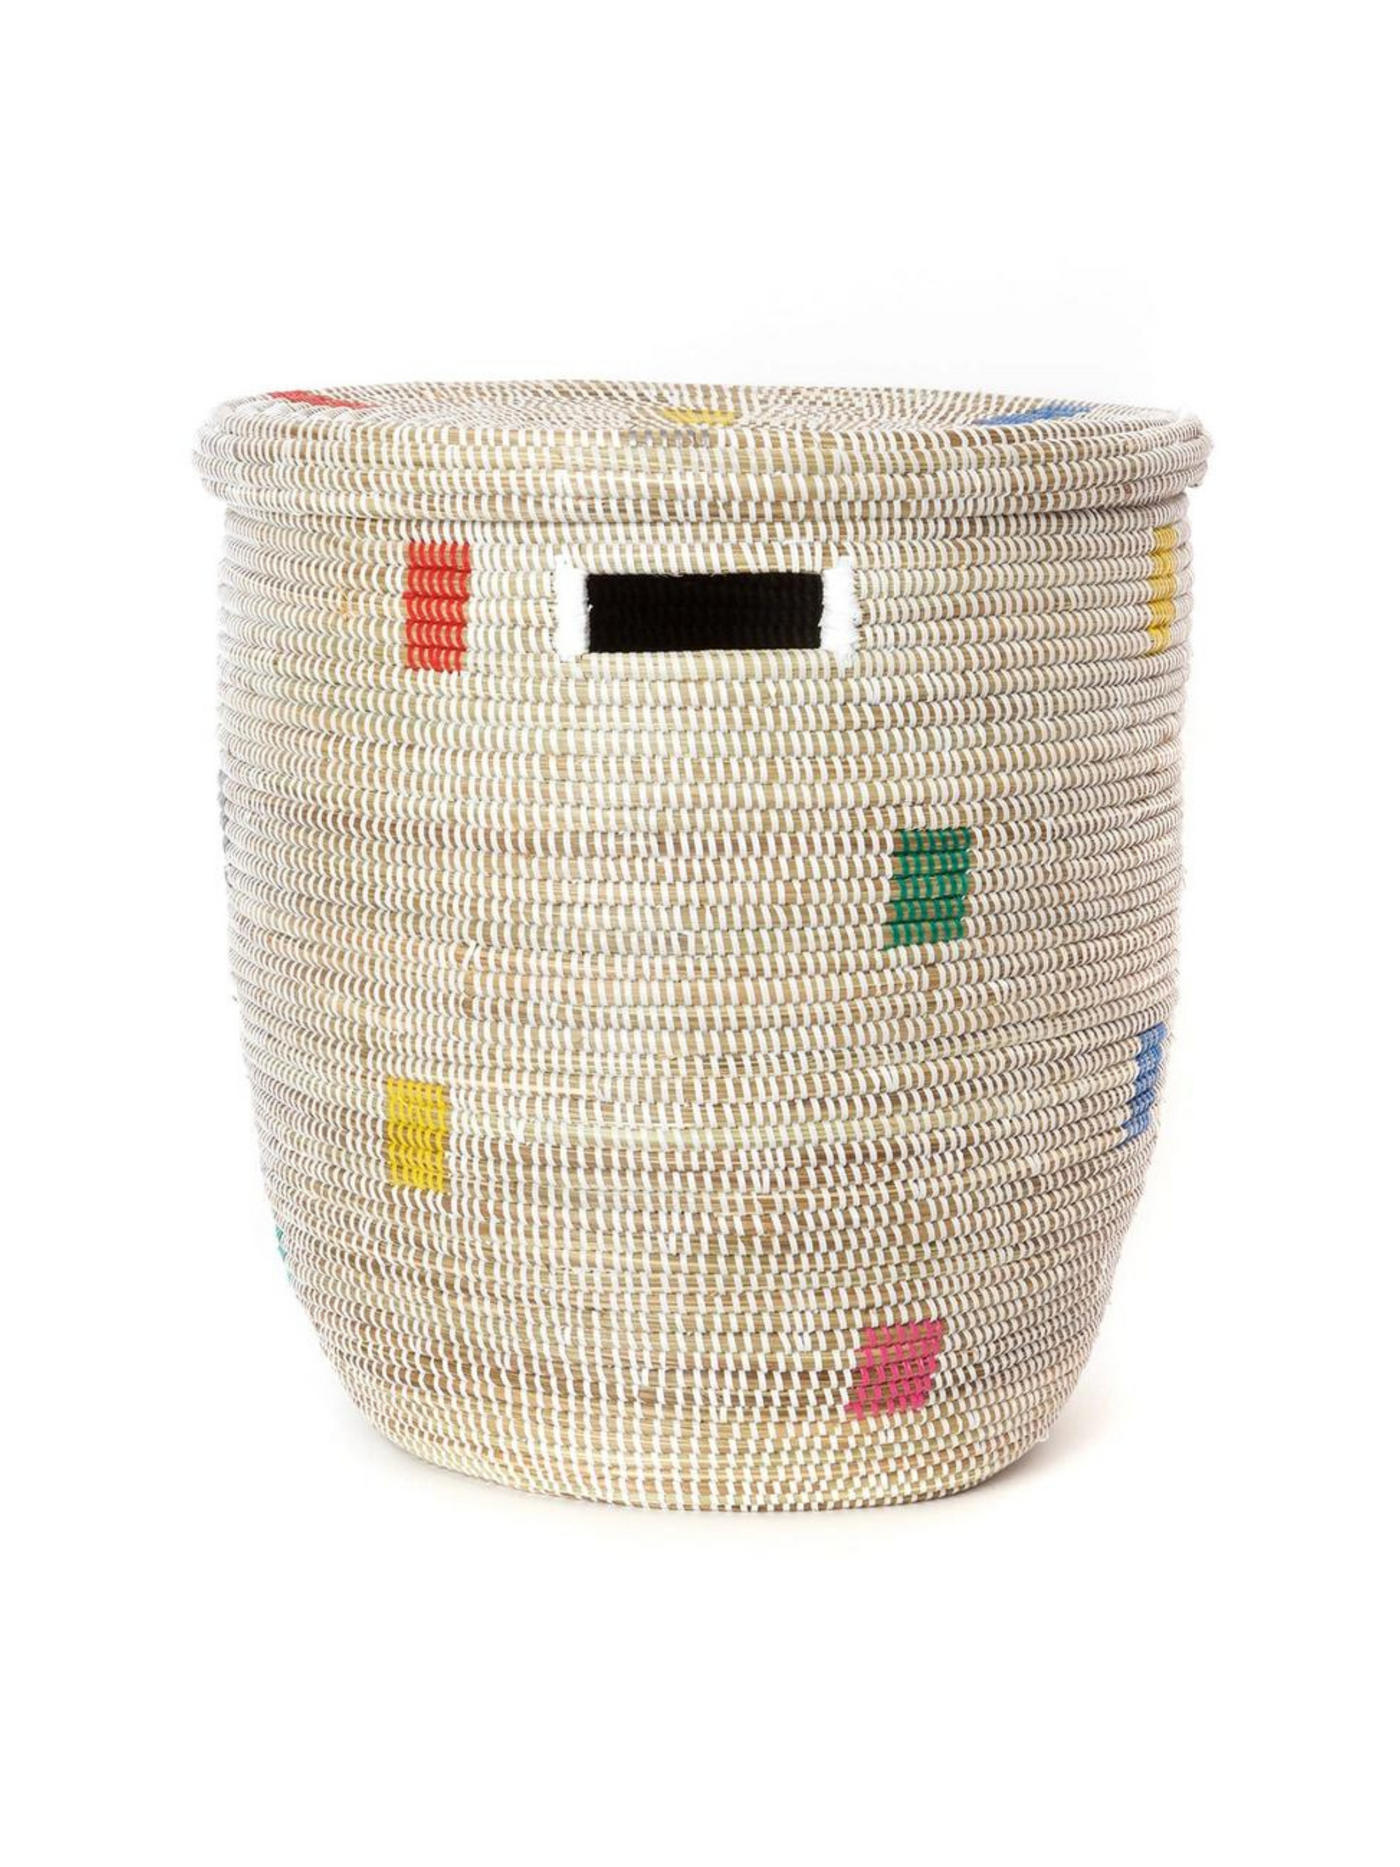 Laundry Basket - Prismatic Pixels (Pick up or local delivery only)